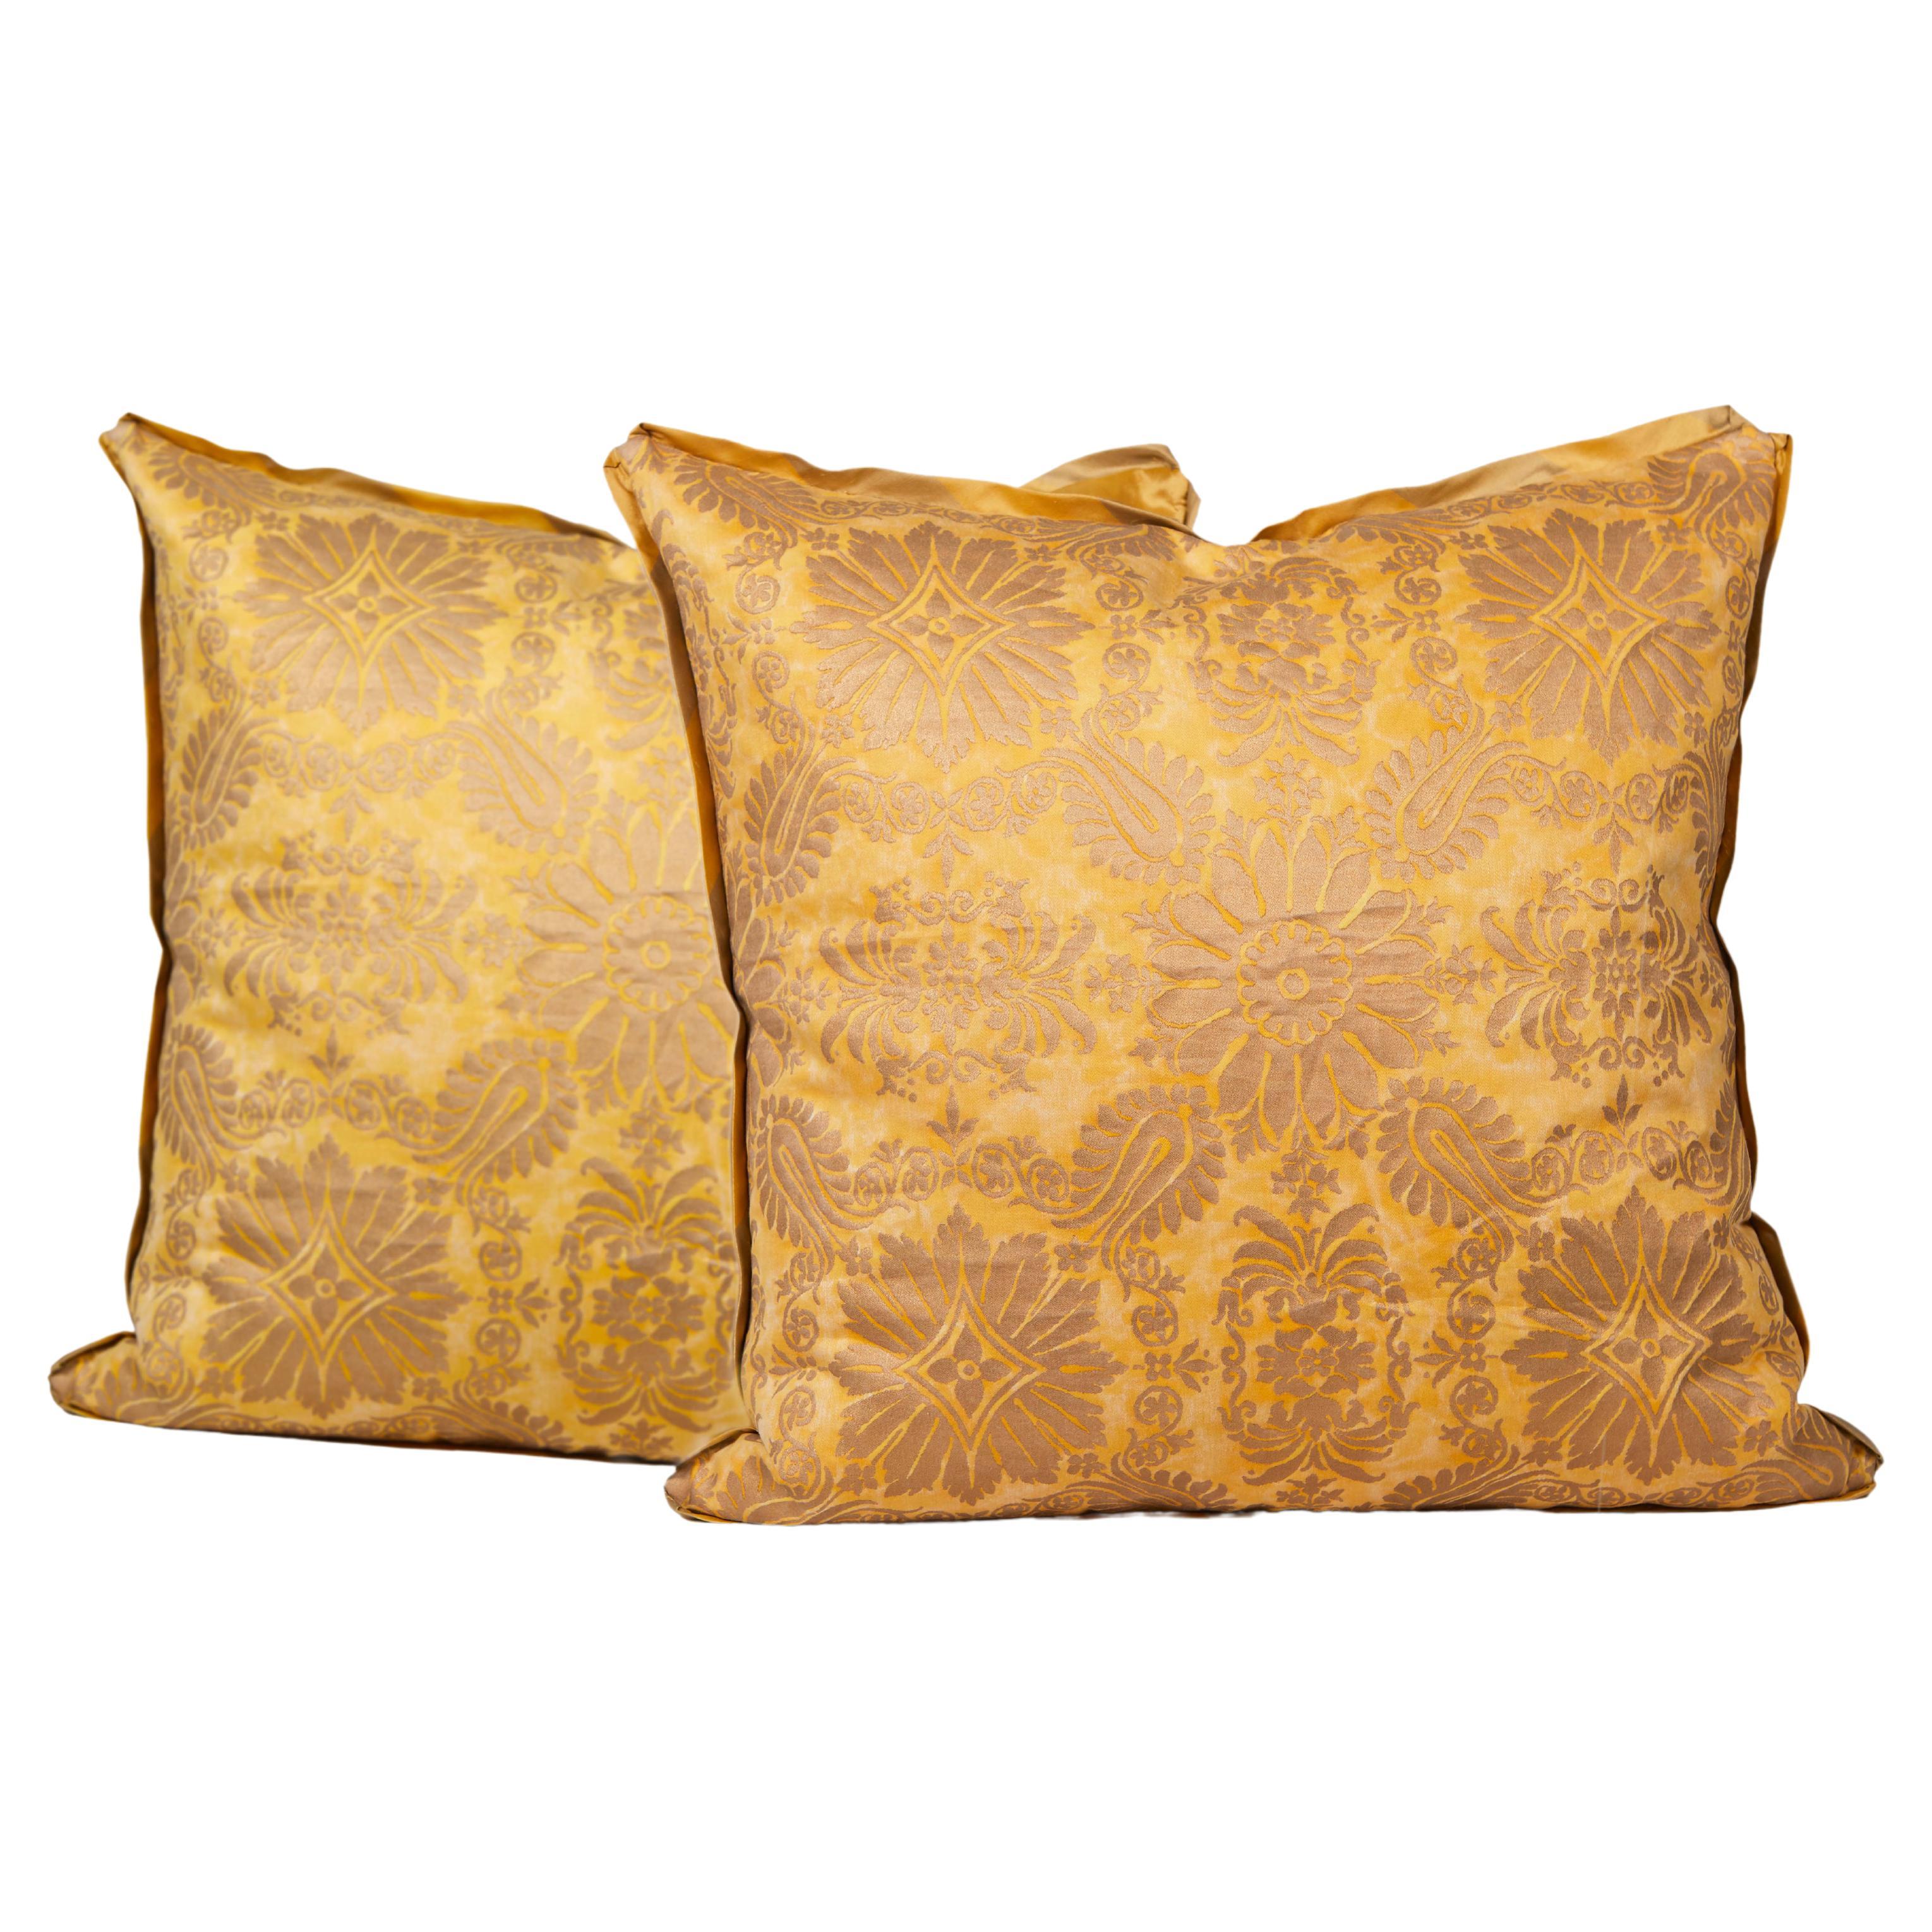 Pair of Gold Fortuny Fabric Cushions in the Impero Pattern